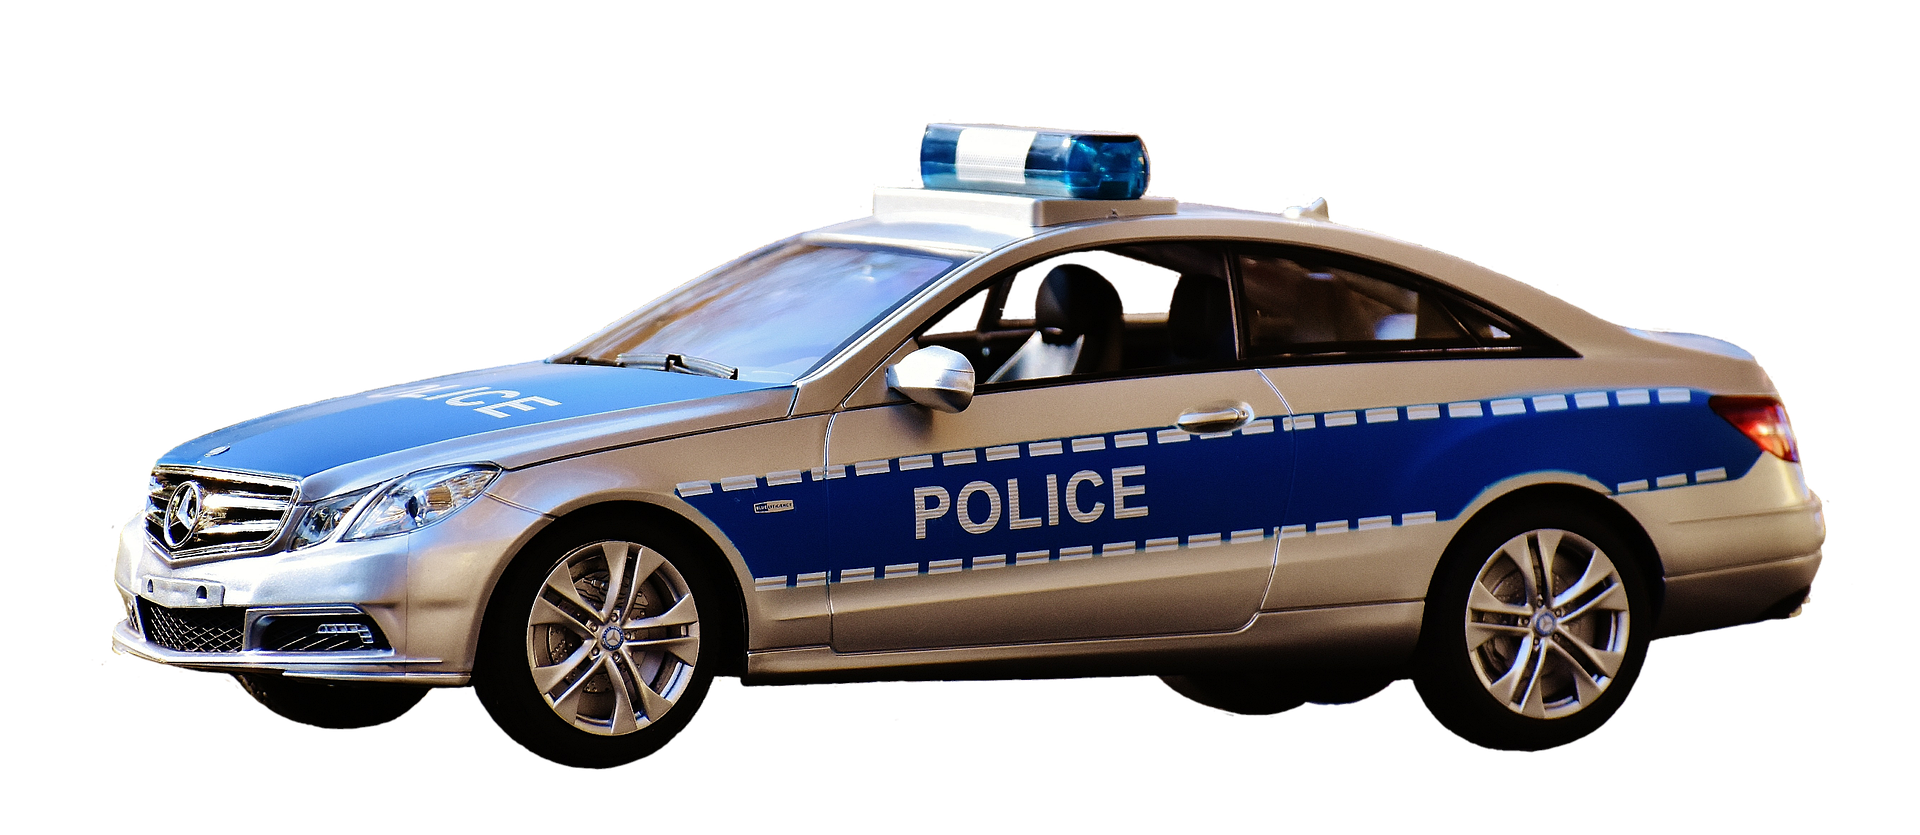 police-car-g1e860f943_1920.png